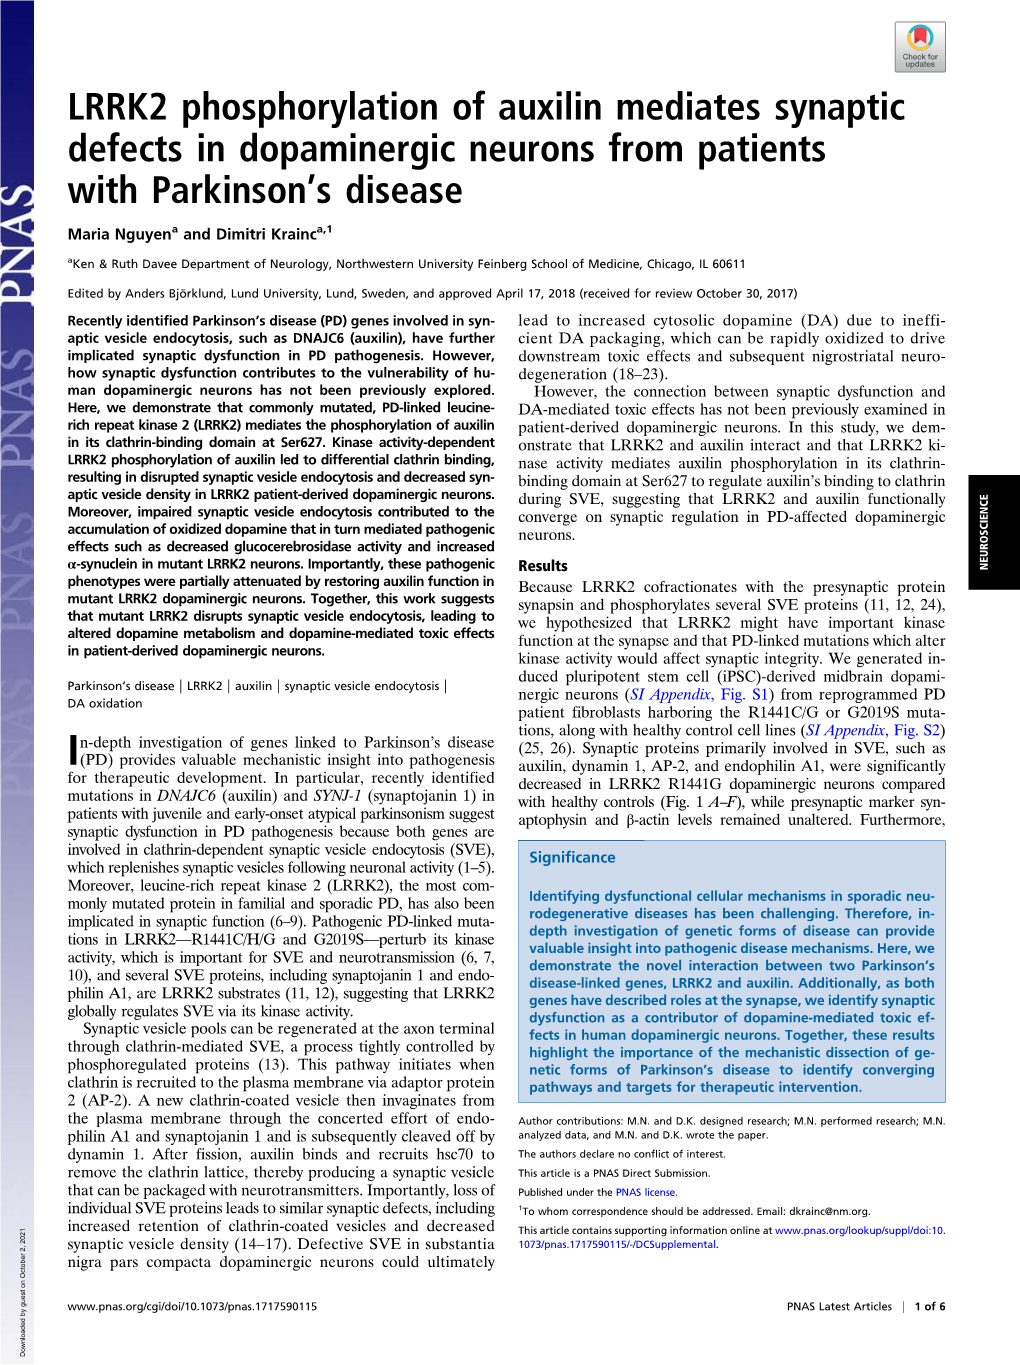 LRRK2 Phosphorylation of Auxilin Mediates Synaptic Defects in Dopaminergic Neurons from Patients with Parkinson’S Disease